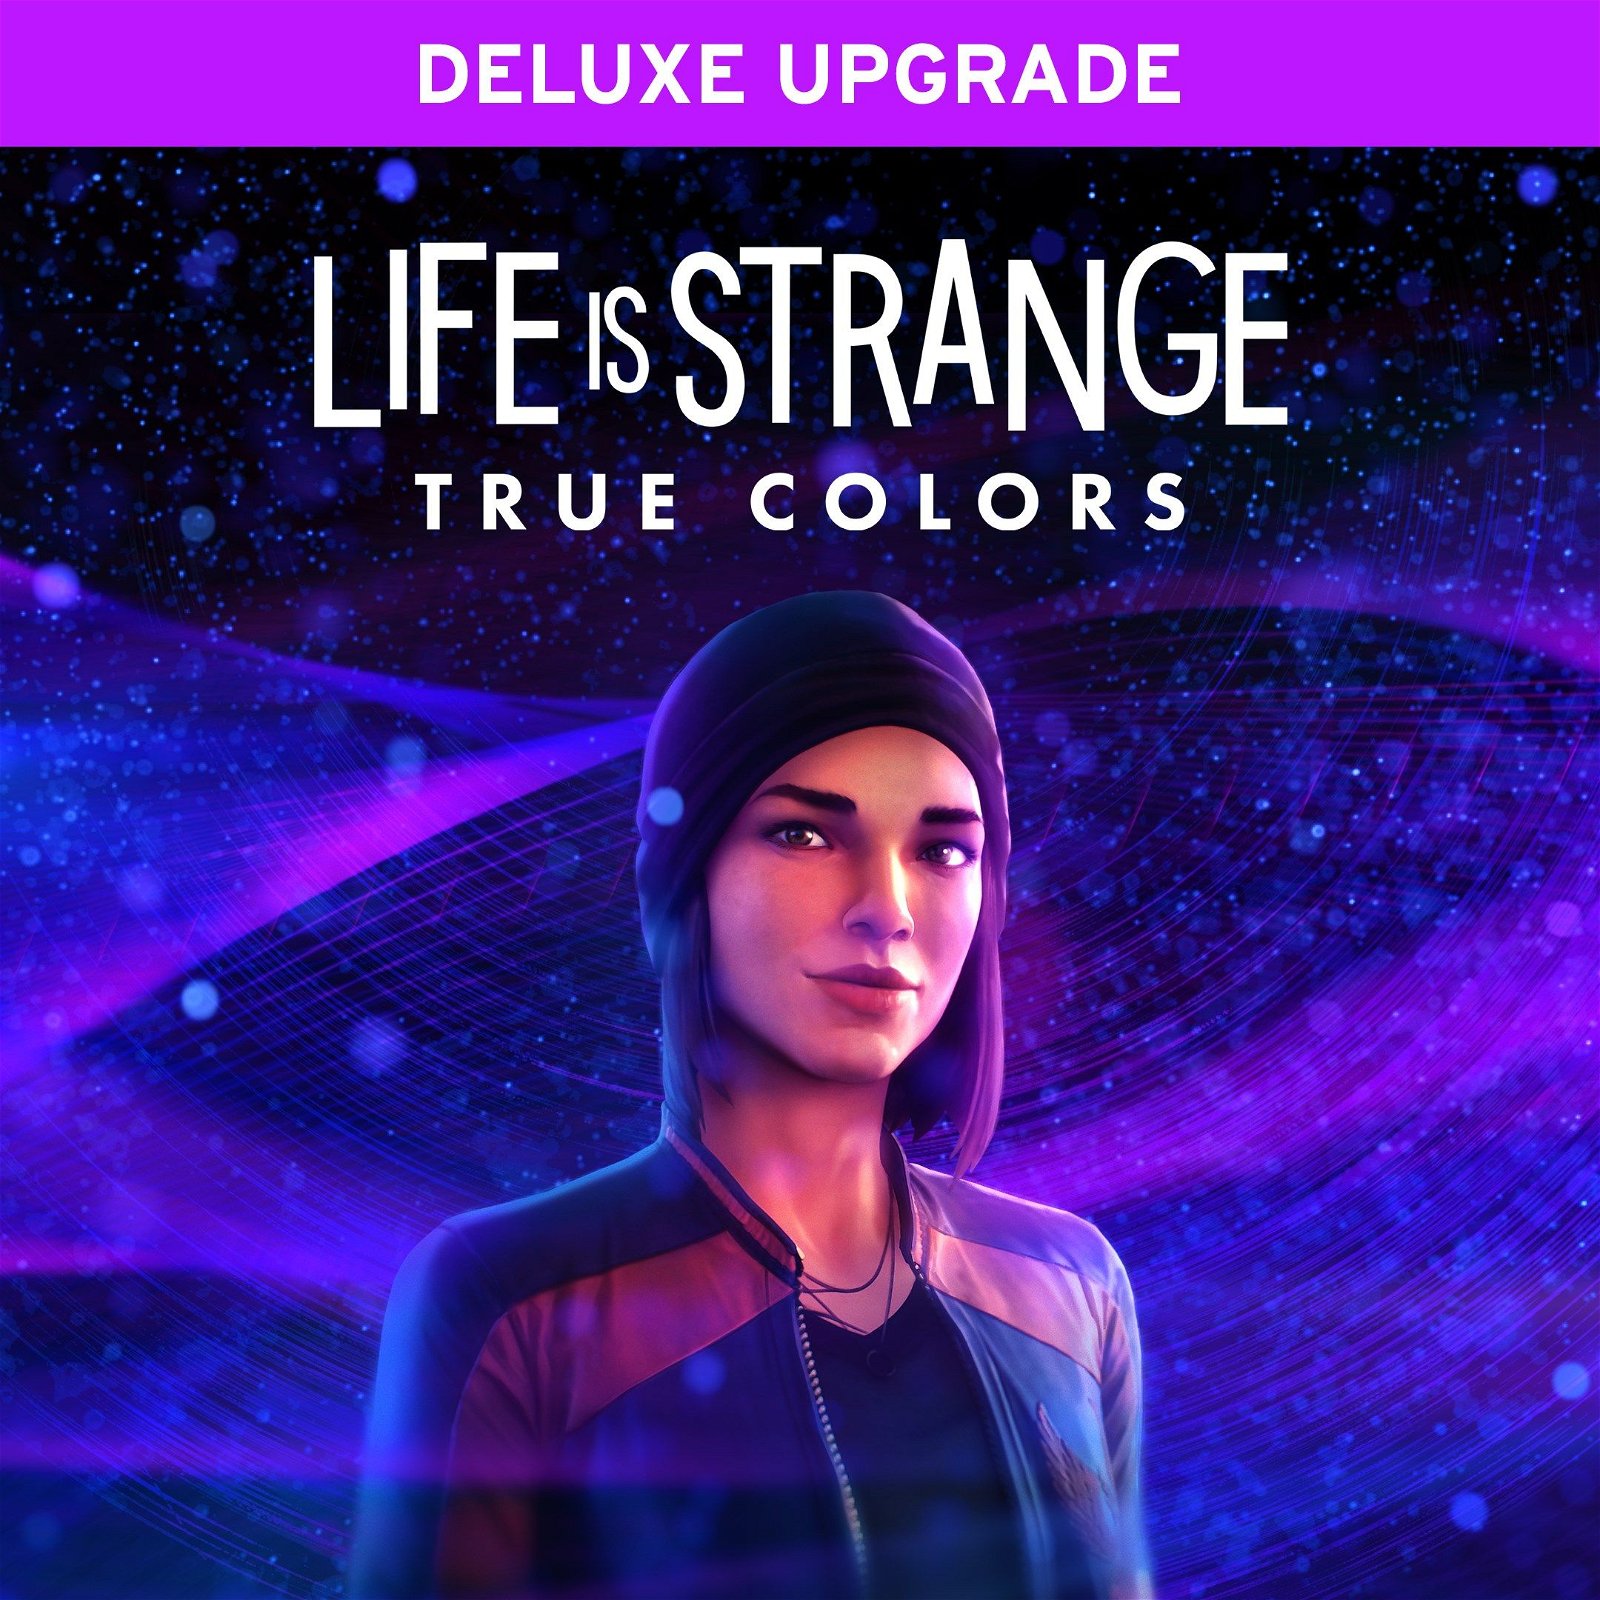 Image of Life is Strange: True Colors - Deluxe Upgrade